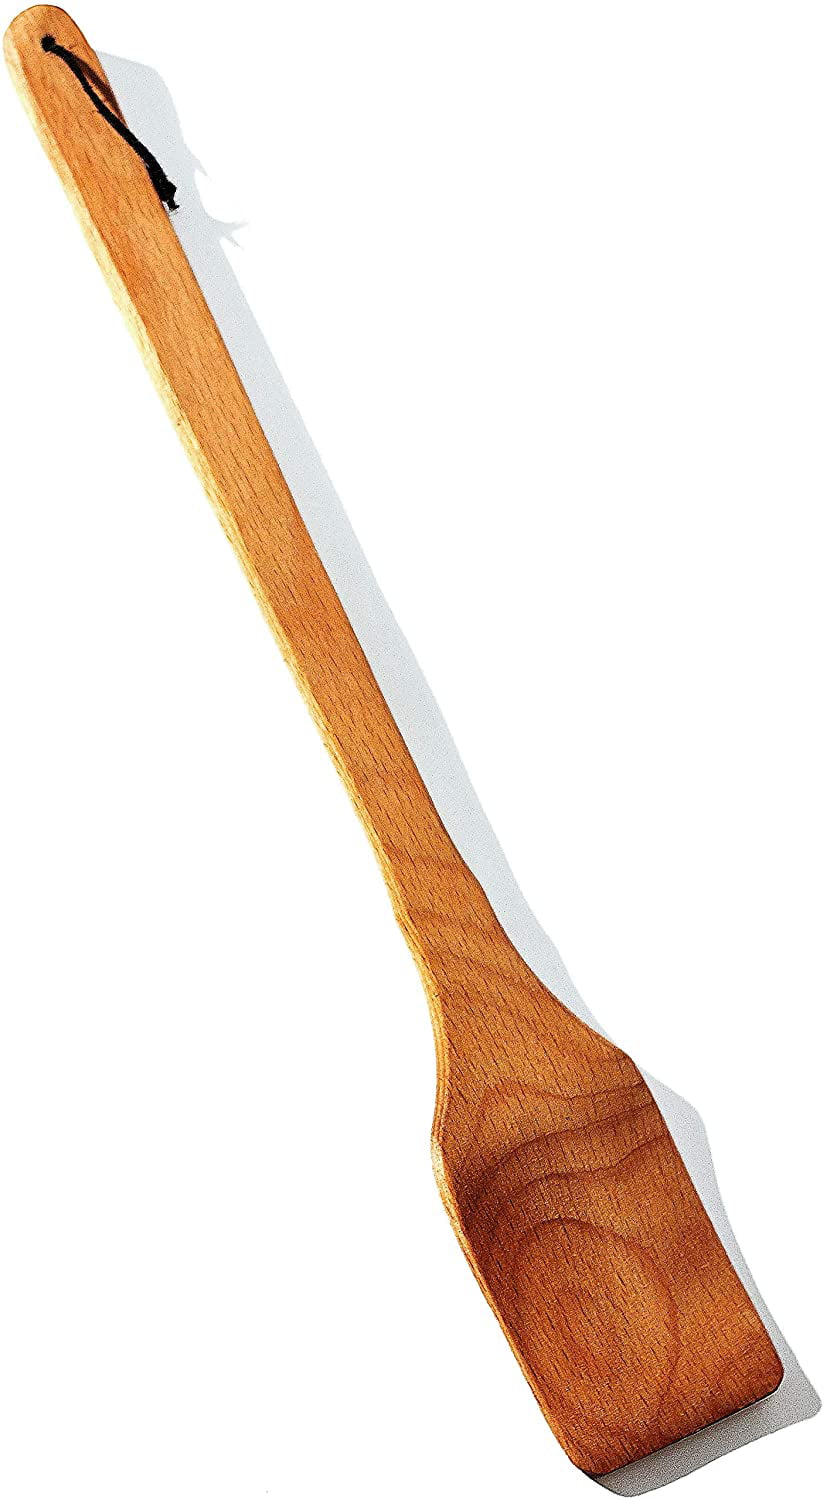 Ecosall Large Wooden Spoon Sturdy Durable Long Spatula Made of Natural Beechwood Great for Brewing Stirring Grill Mixing 18-Inch Cajun Stir Paddle for Cooking in Big Pots & Wall Décor 